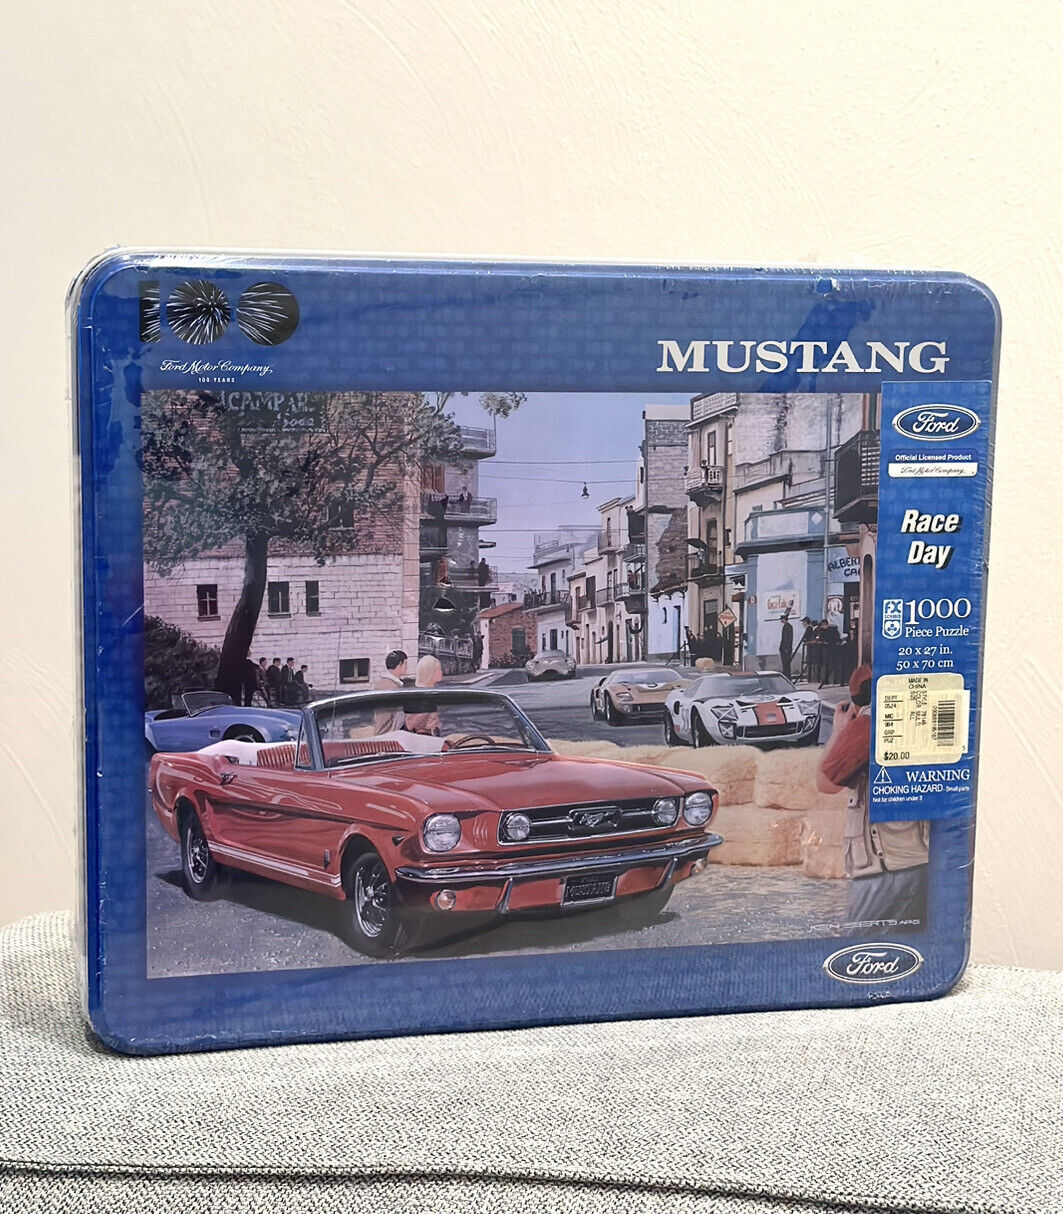 New Puzzle Ford Motor Co Mustang Race Day 1000 Piece Puzzle Anniversary Tin Box